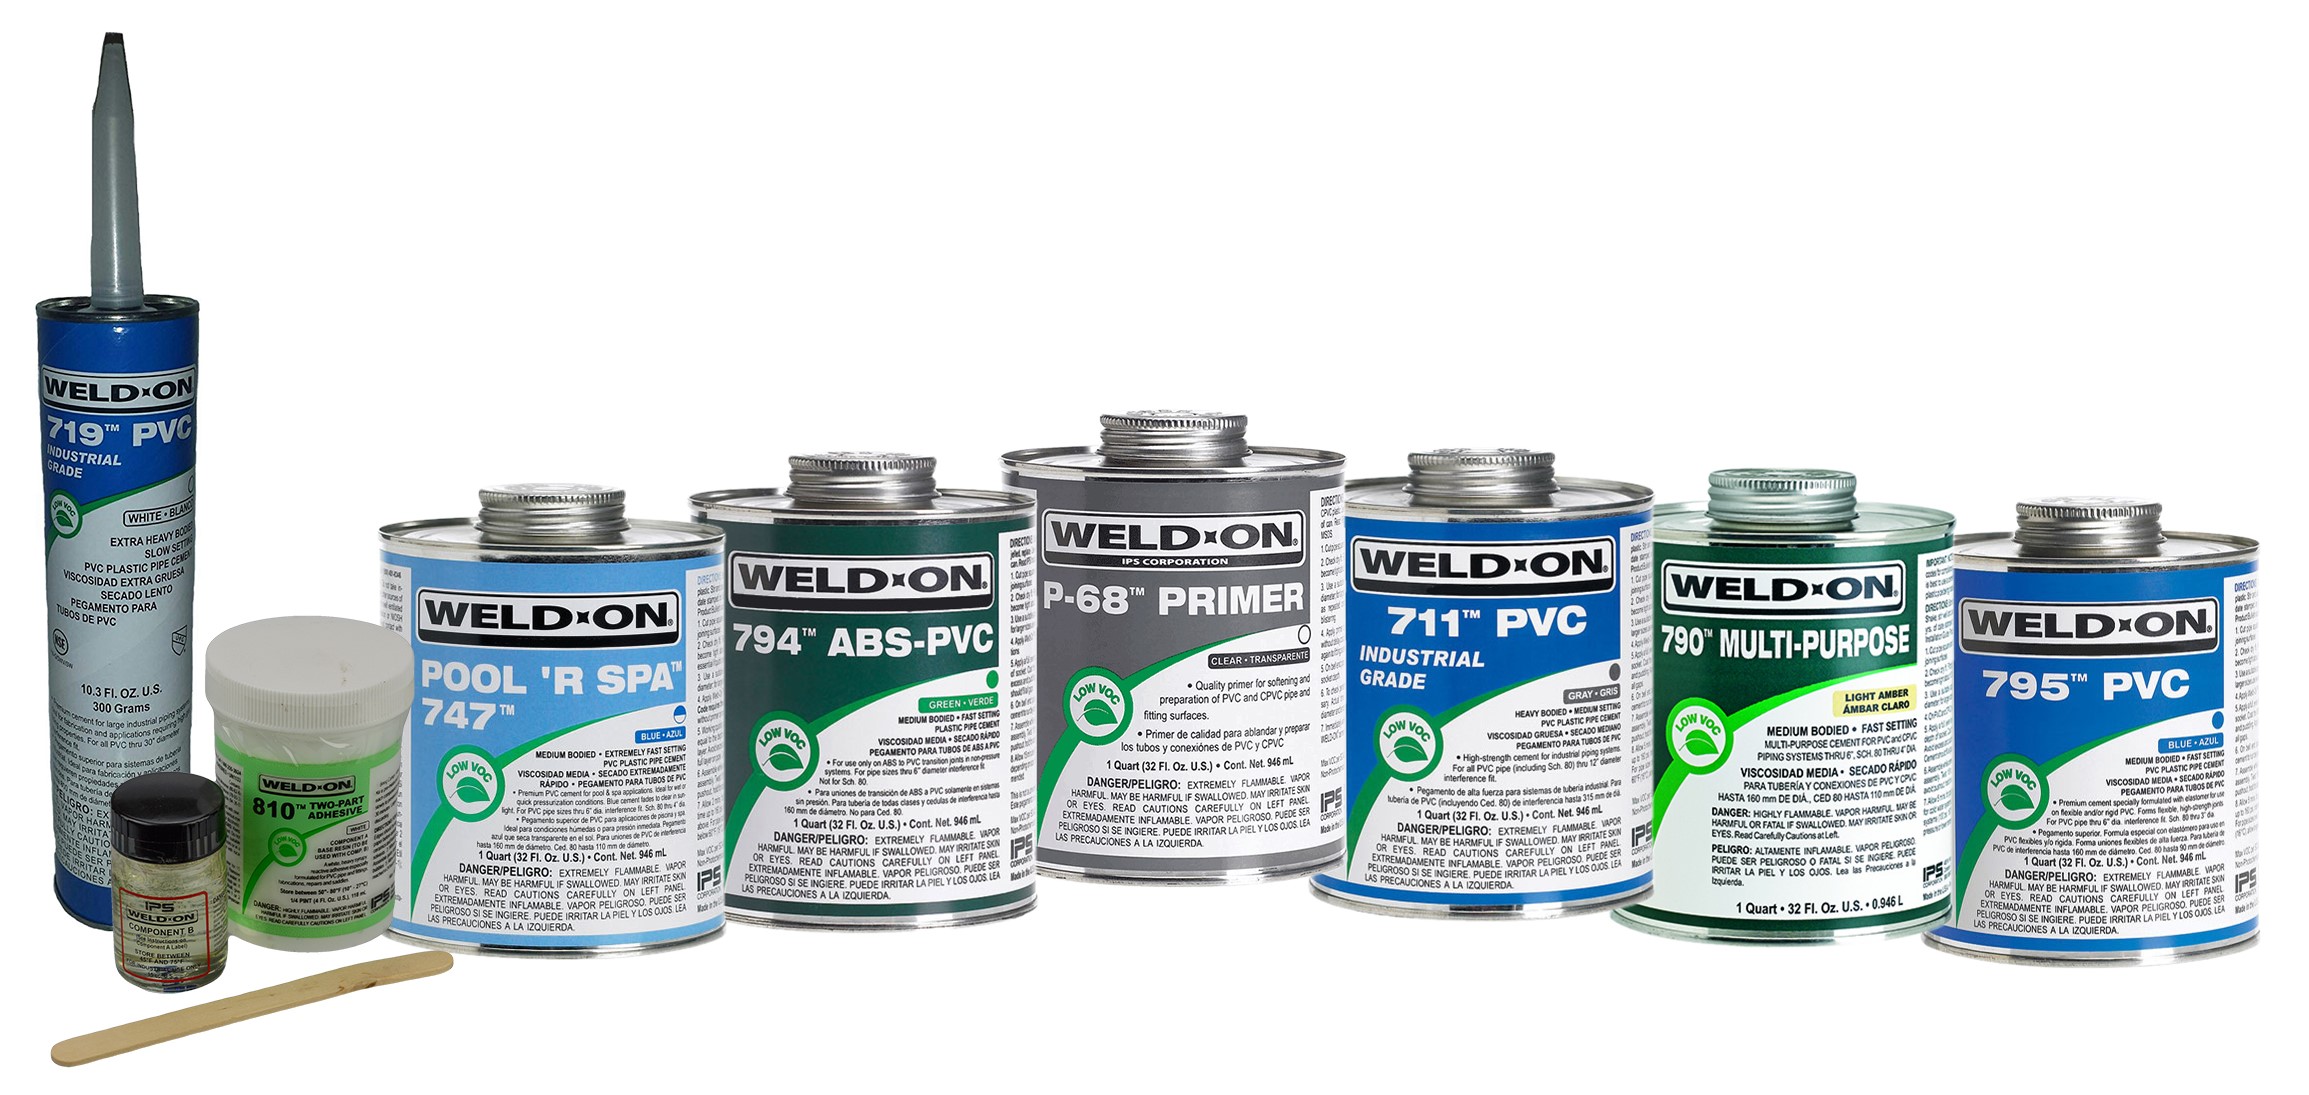 IPS Weld-on pool and spa solvent cement and accessories